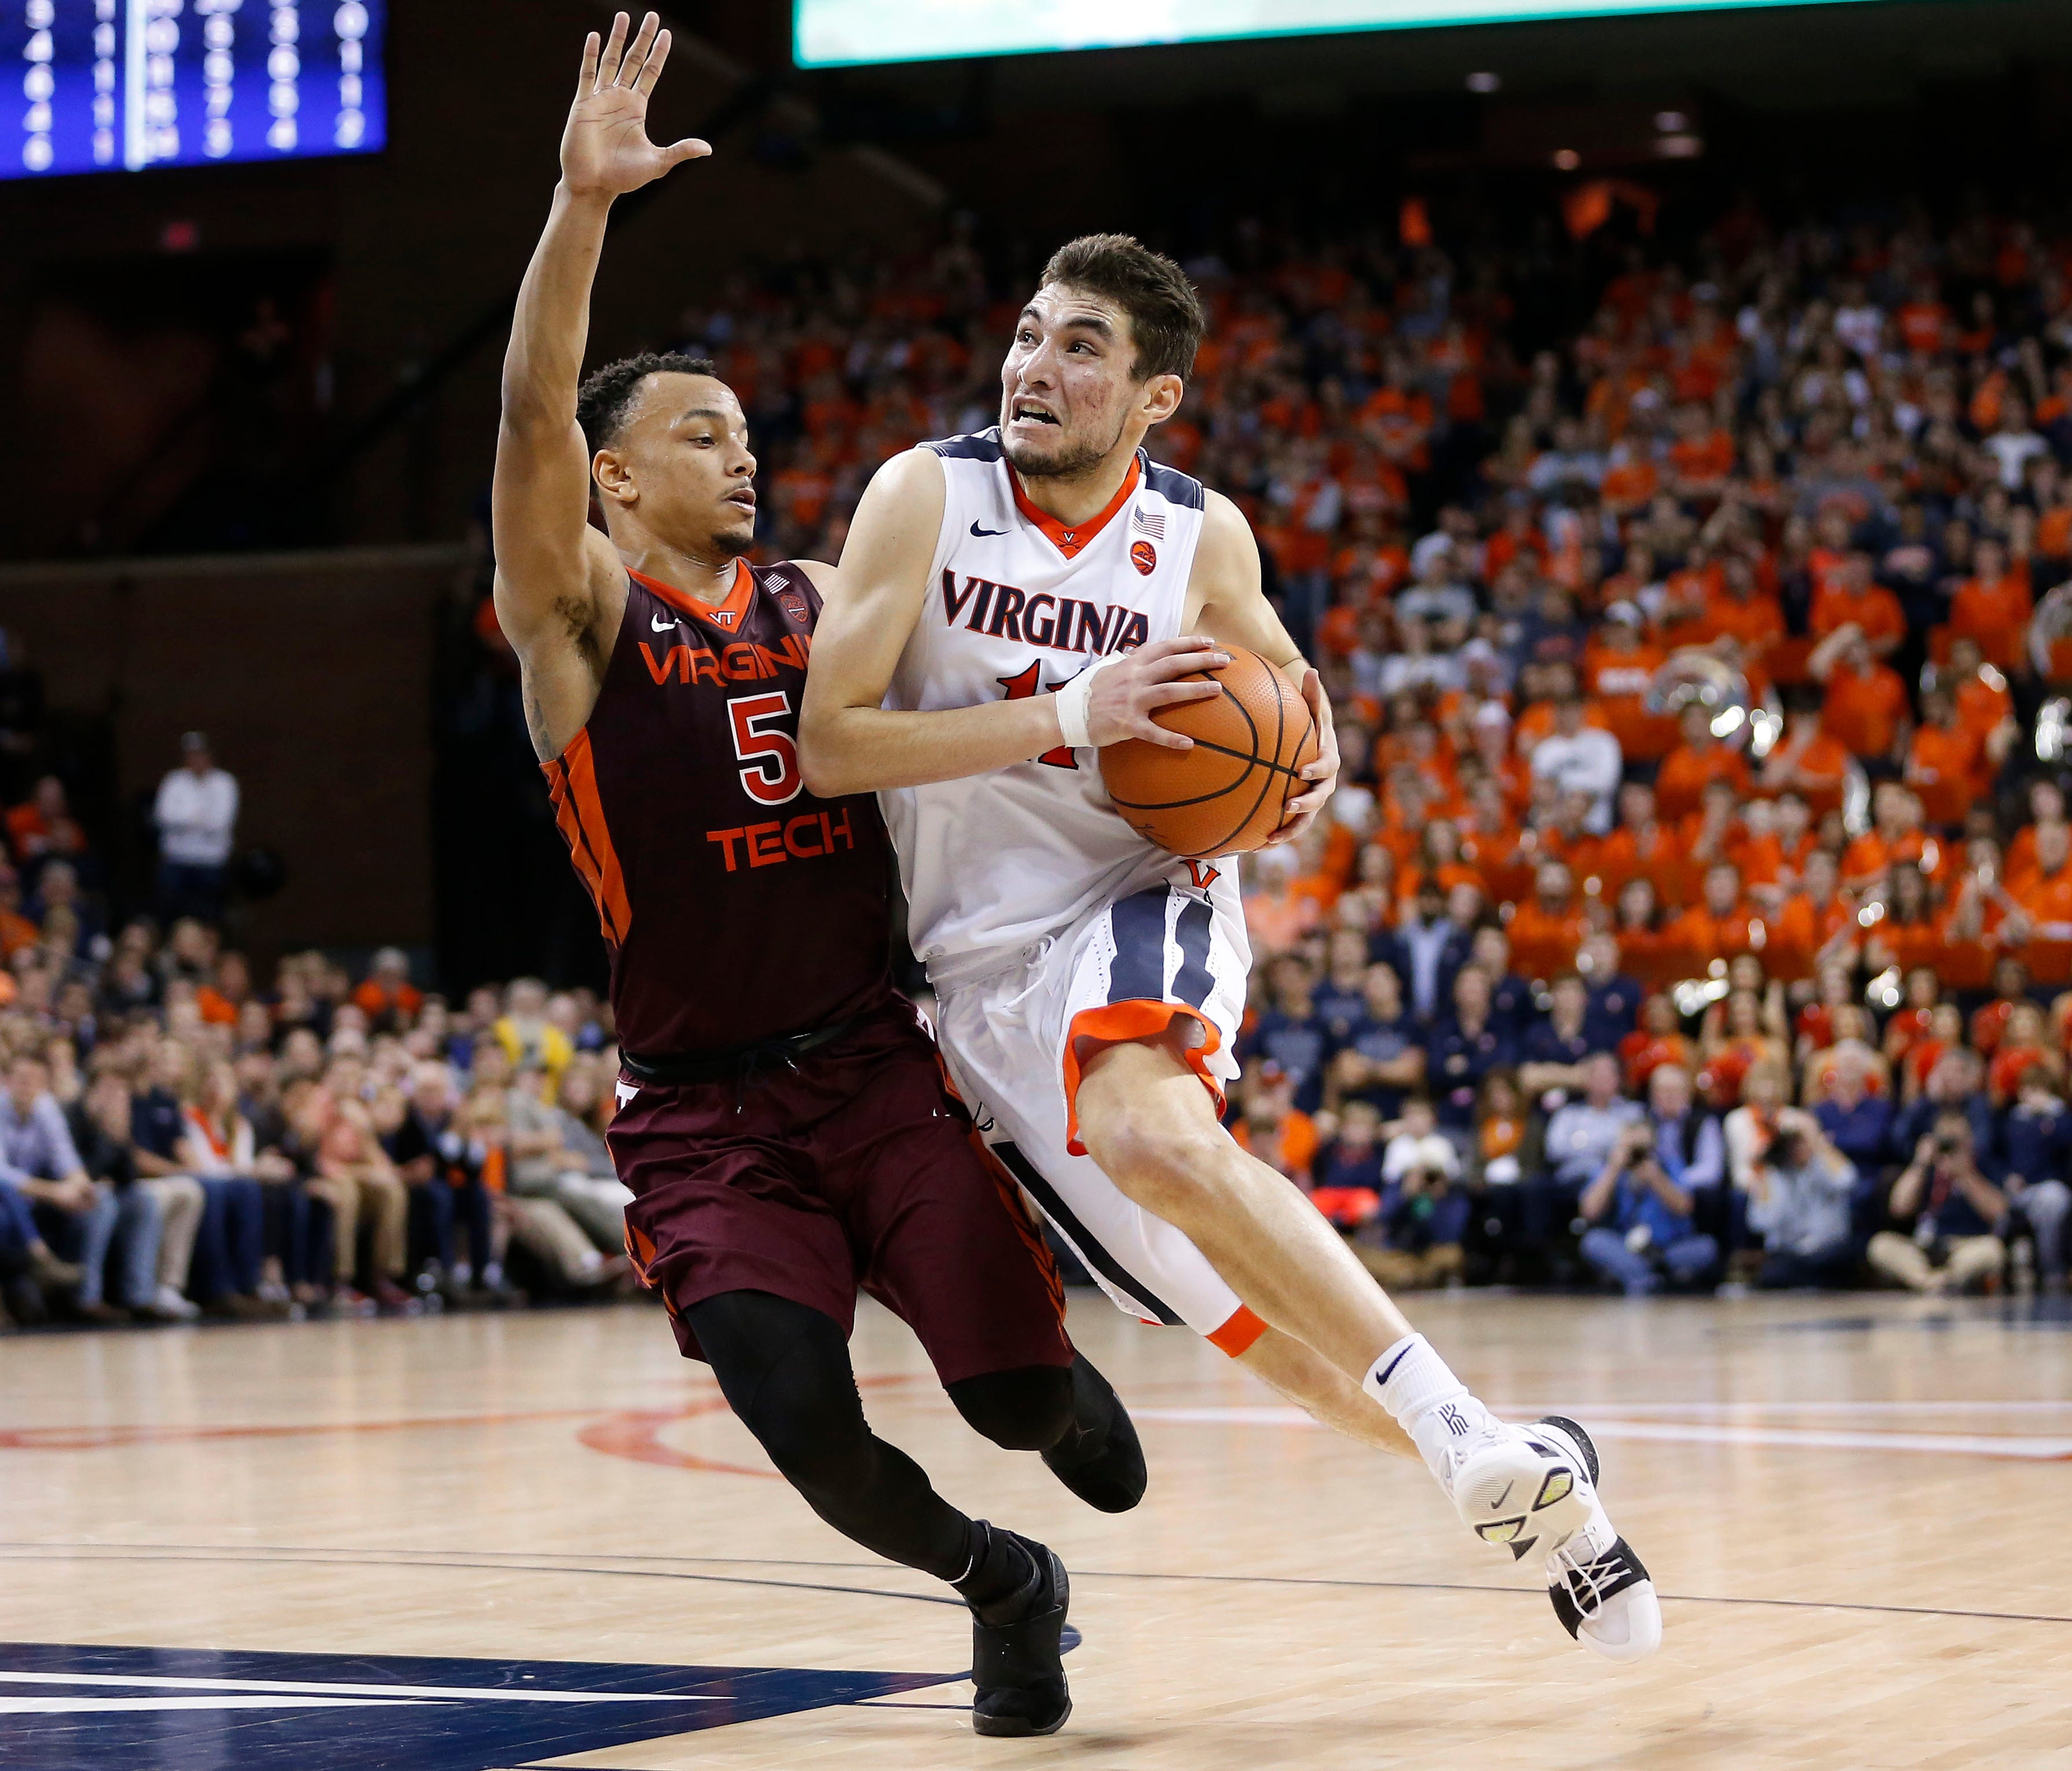 Virginia guard Ty Jerome  dribbles the ball against the defense of Virginia Tech guard Justin Robinson.